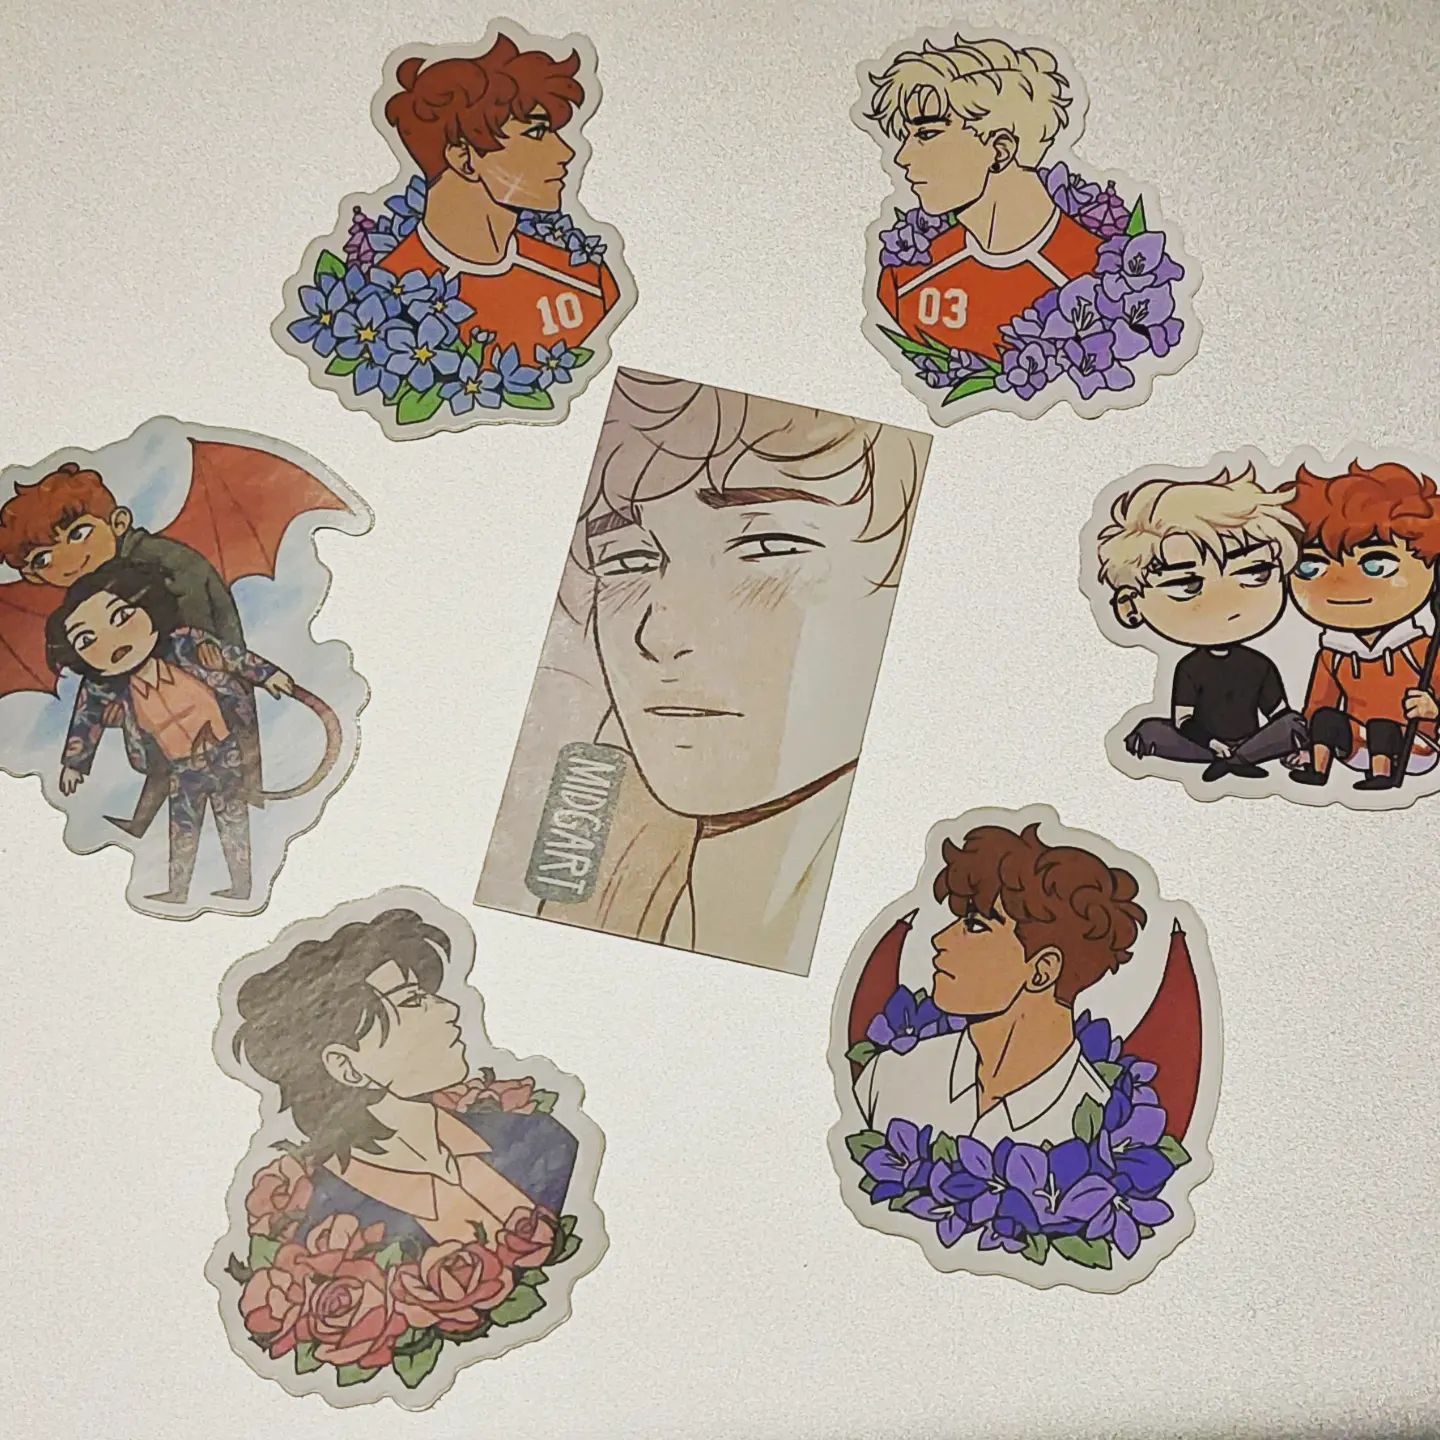 New laptop, new stickers!!! ❤️❤️❤️❤️❤️ Thank you @midgaardian These are amazing!! I've been eyeing your stuff for ages and when I got a new laptop, I decided to treat myself to your freshly restocked stickers. And I love them!!!!

#aftg #andreil #snowbaz #simonsnow #stickers #writersofinstagram #writerslife